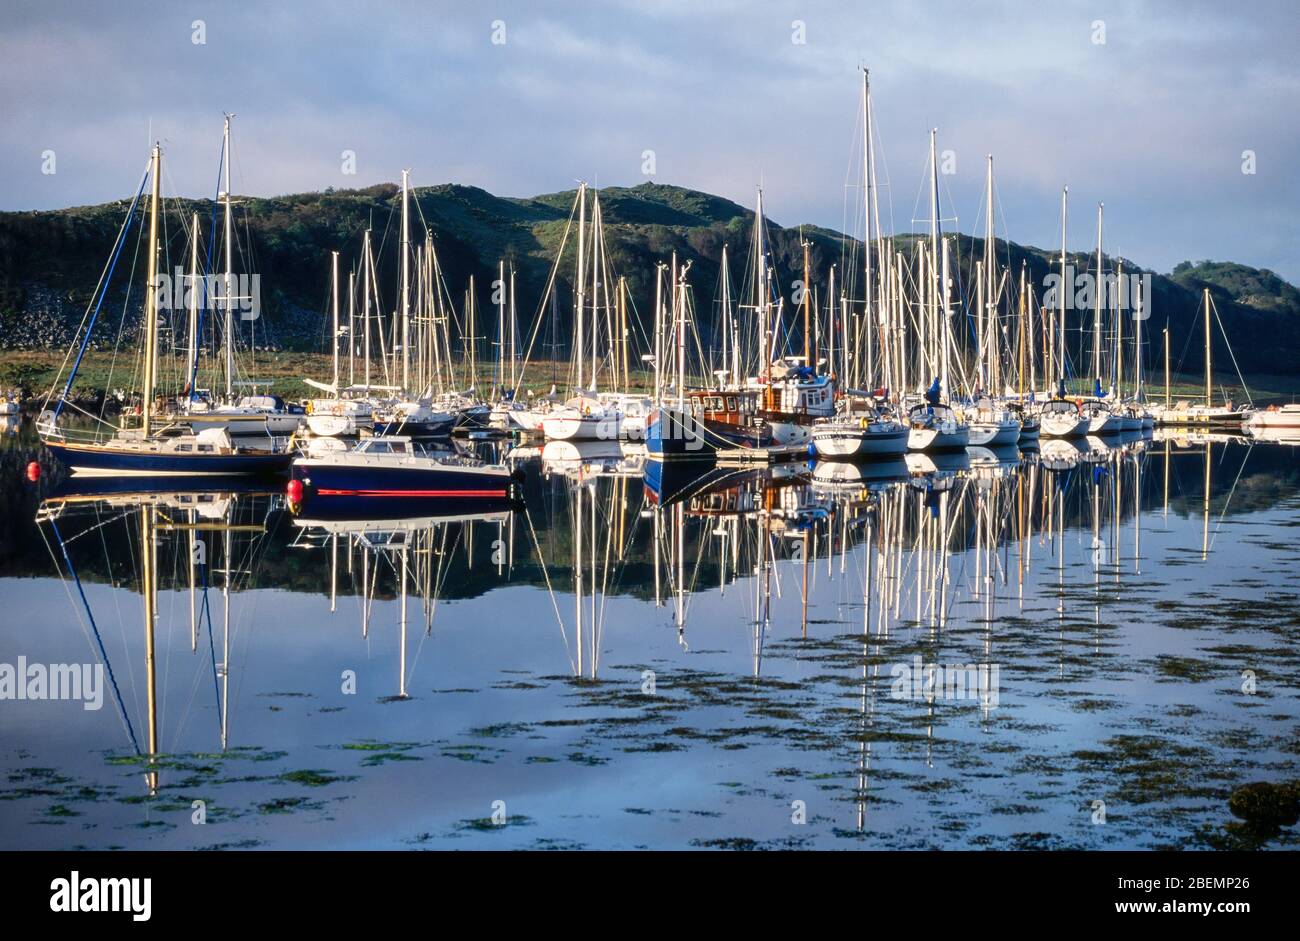 Sailing boats & yachts moored in Ardfern Yacht Centre Marina with beautiful reflections in still waters of Loch Craignish, Lochgilphead, Scotland, UK Stock Photo